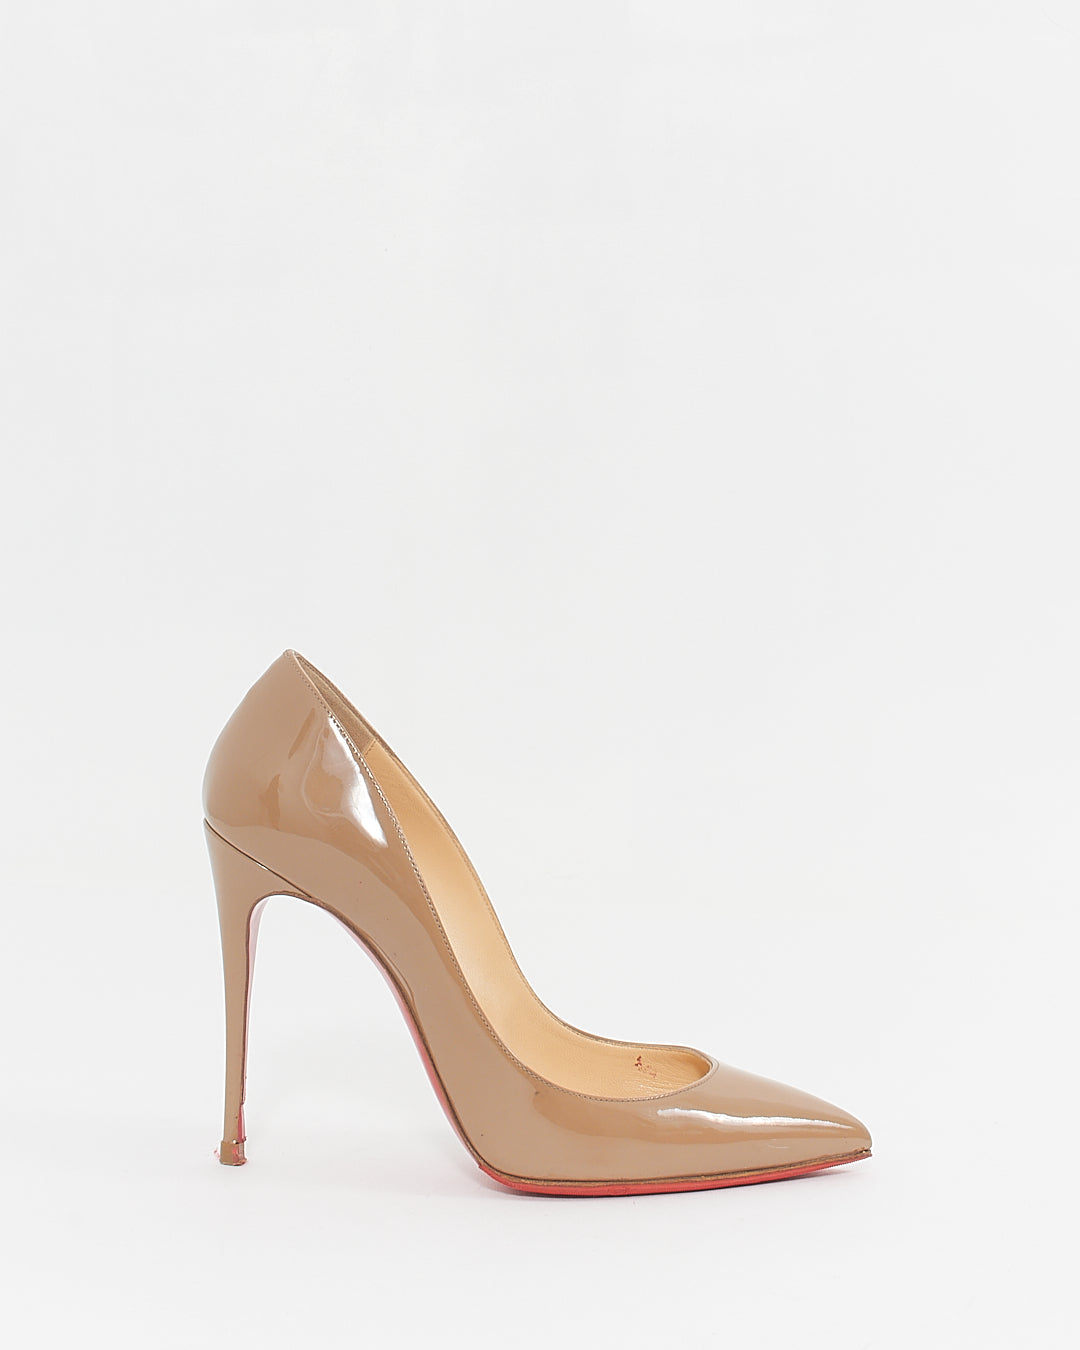 Christian Louboutin Dark Beige Patent Leather So Kate 120mm Pumps - 38